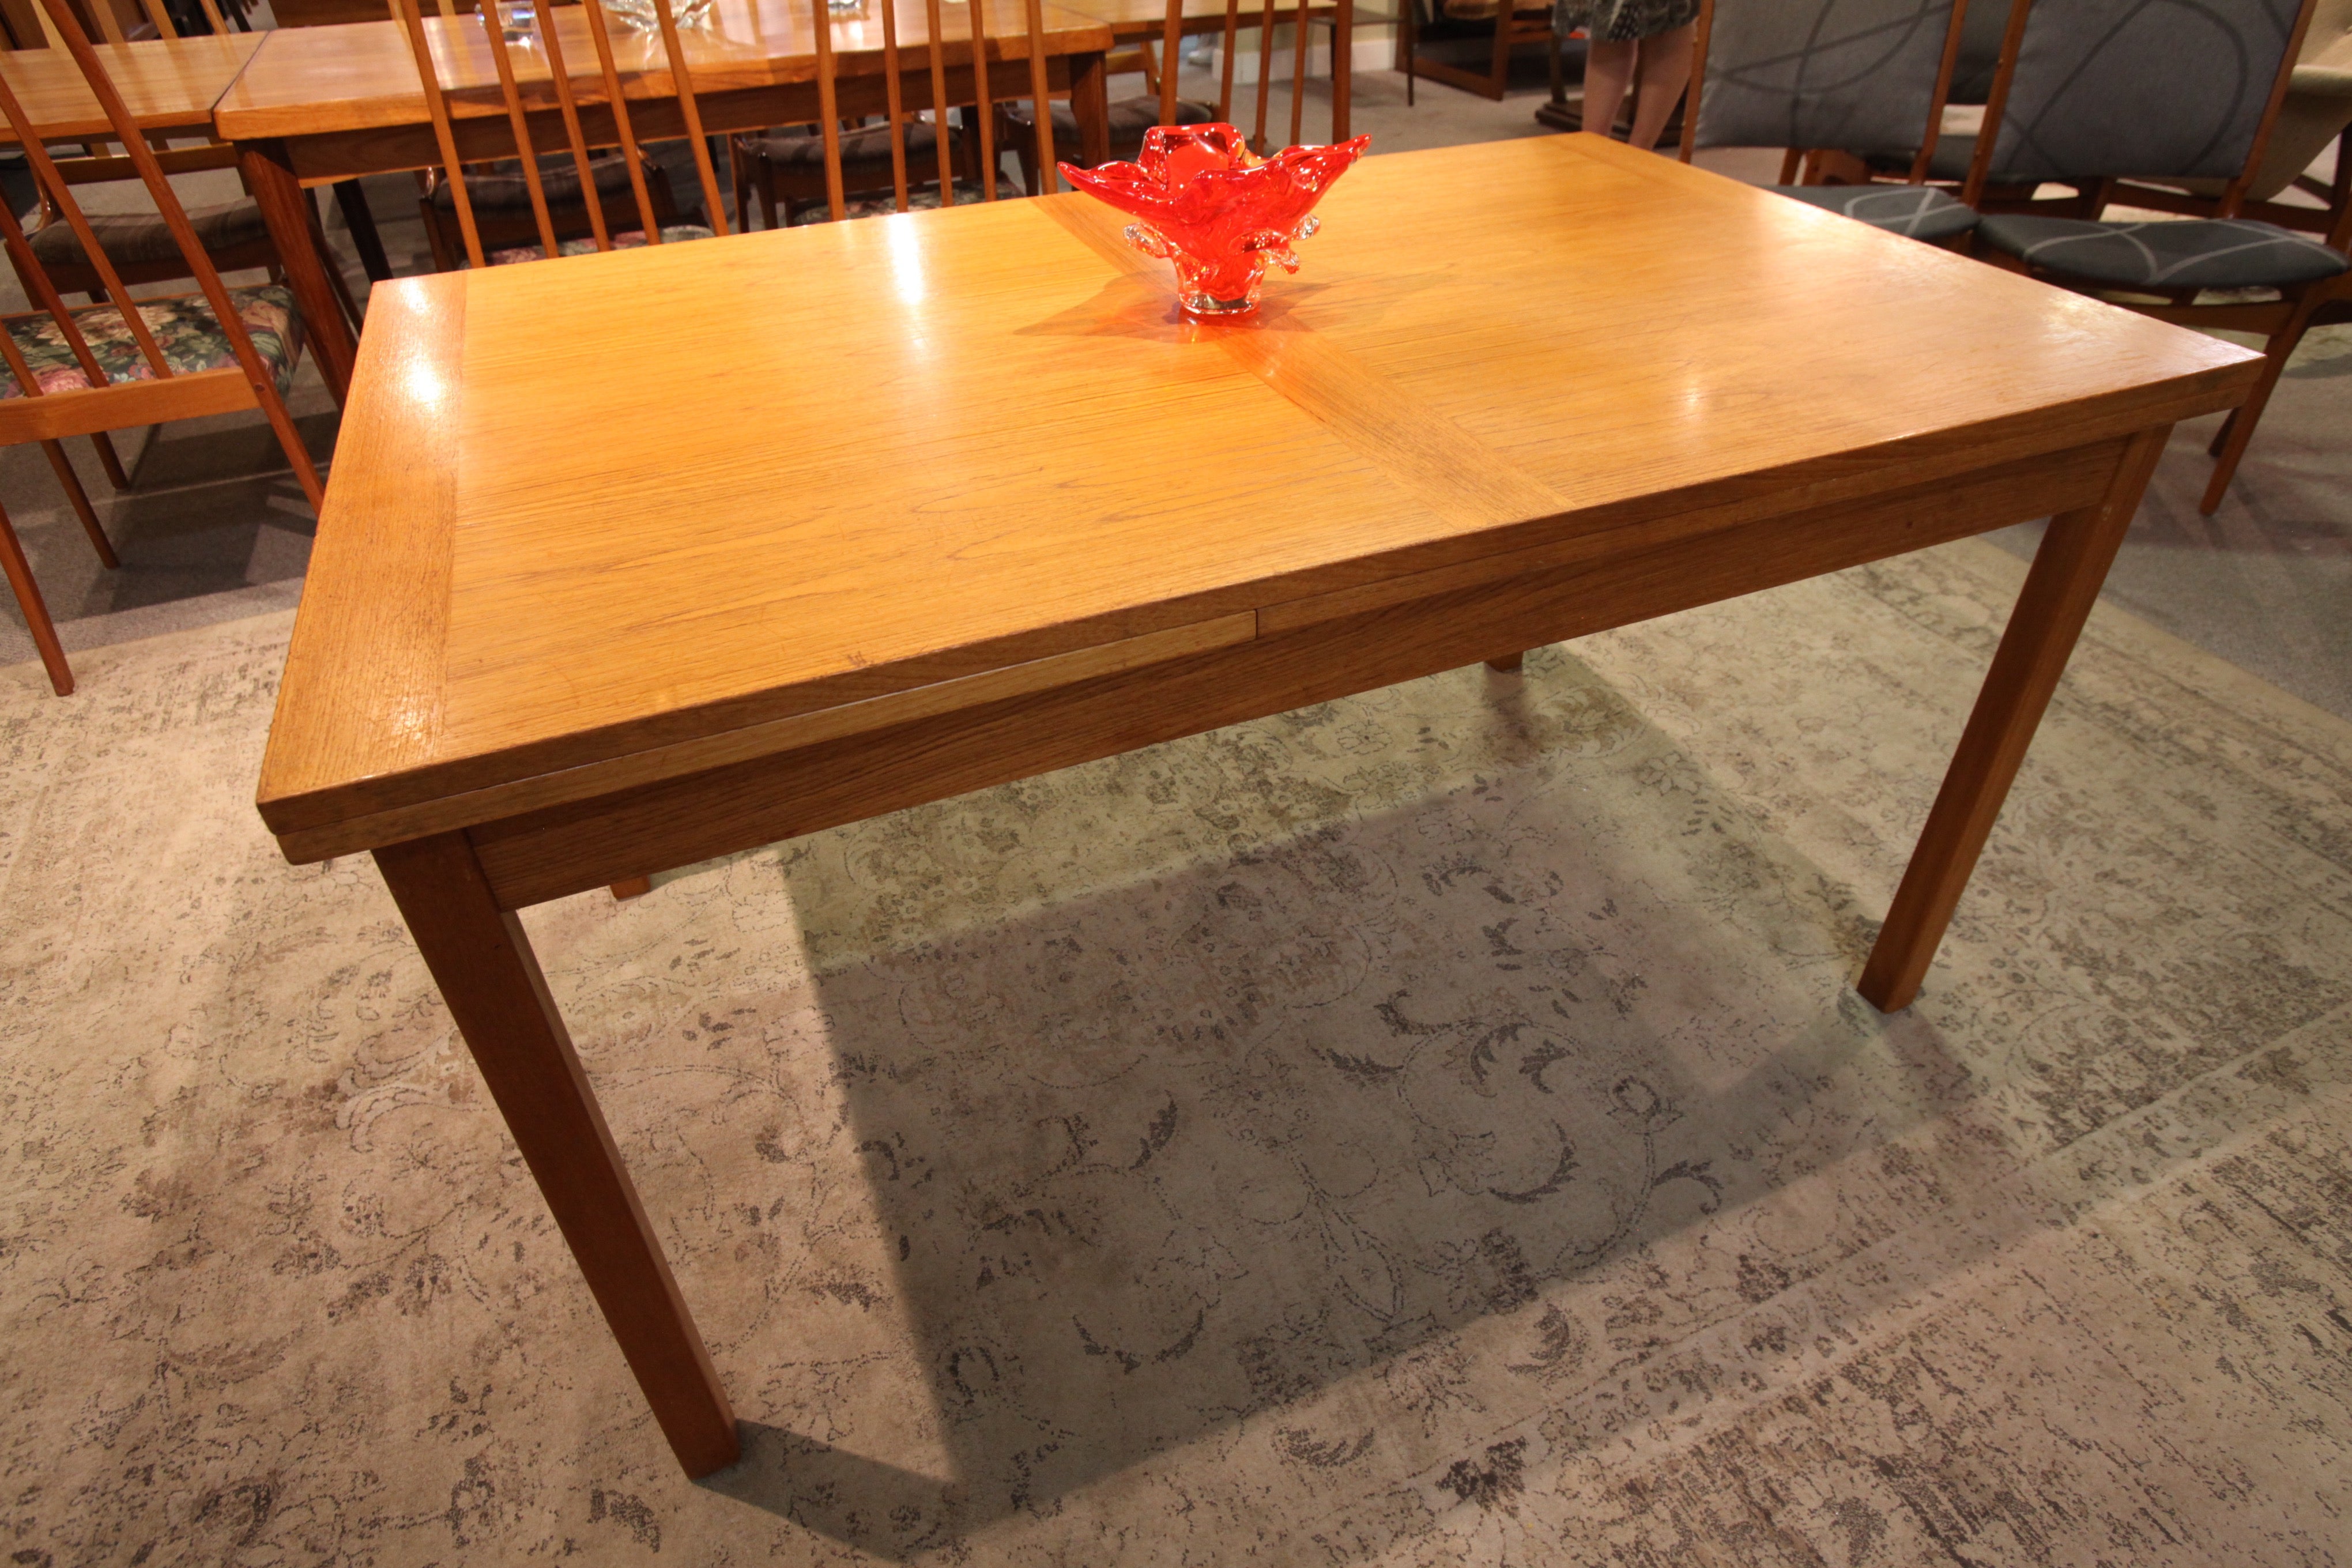 Vintage Danish Teak Dining Table with Pullout Extensions (92.5" x 33.5") or (53" x 33.5")